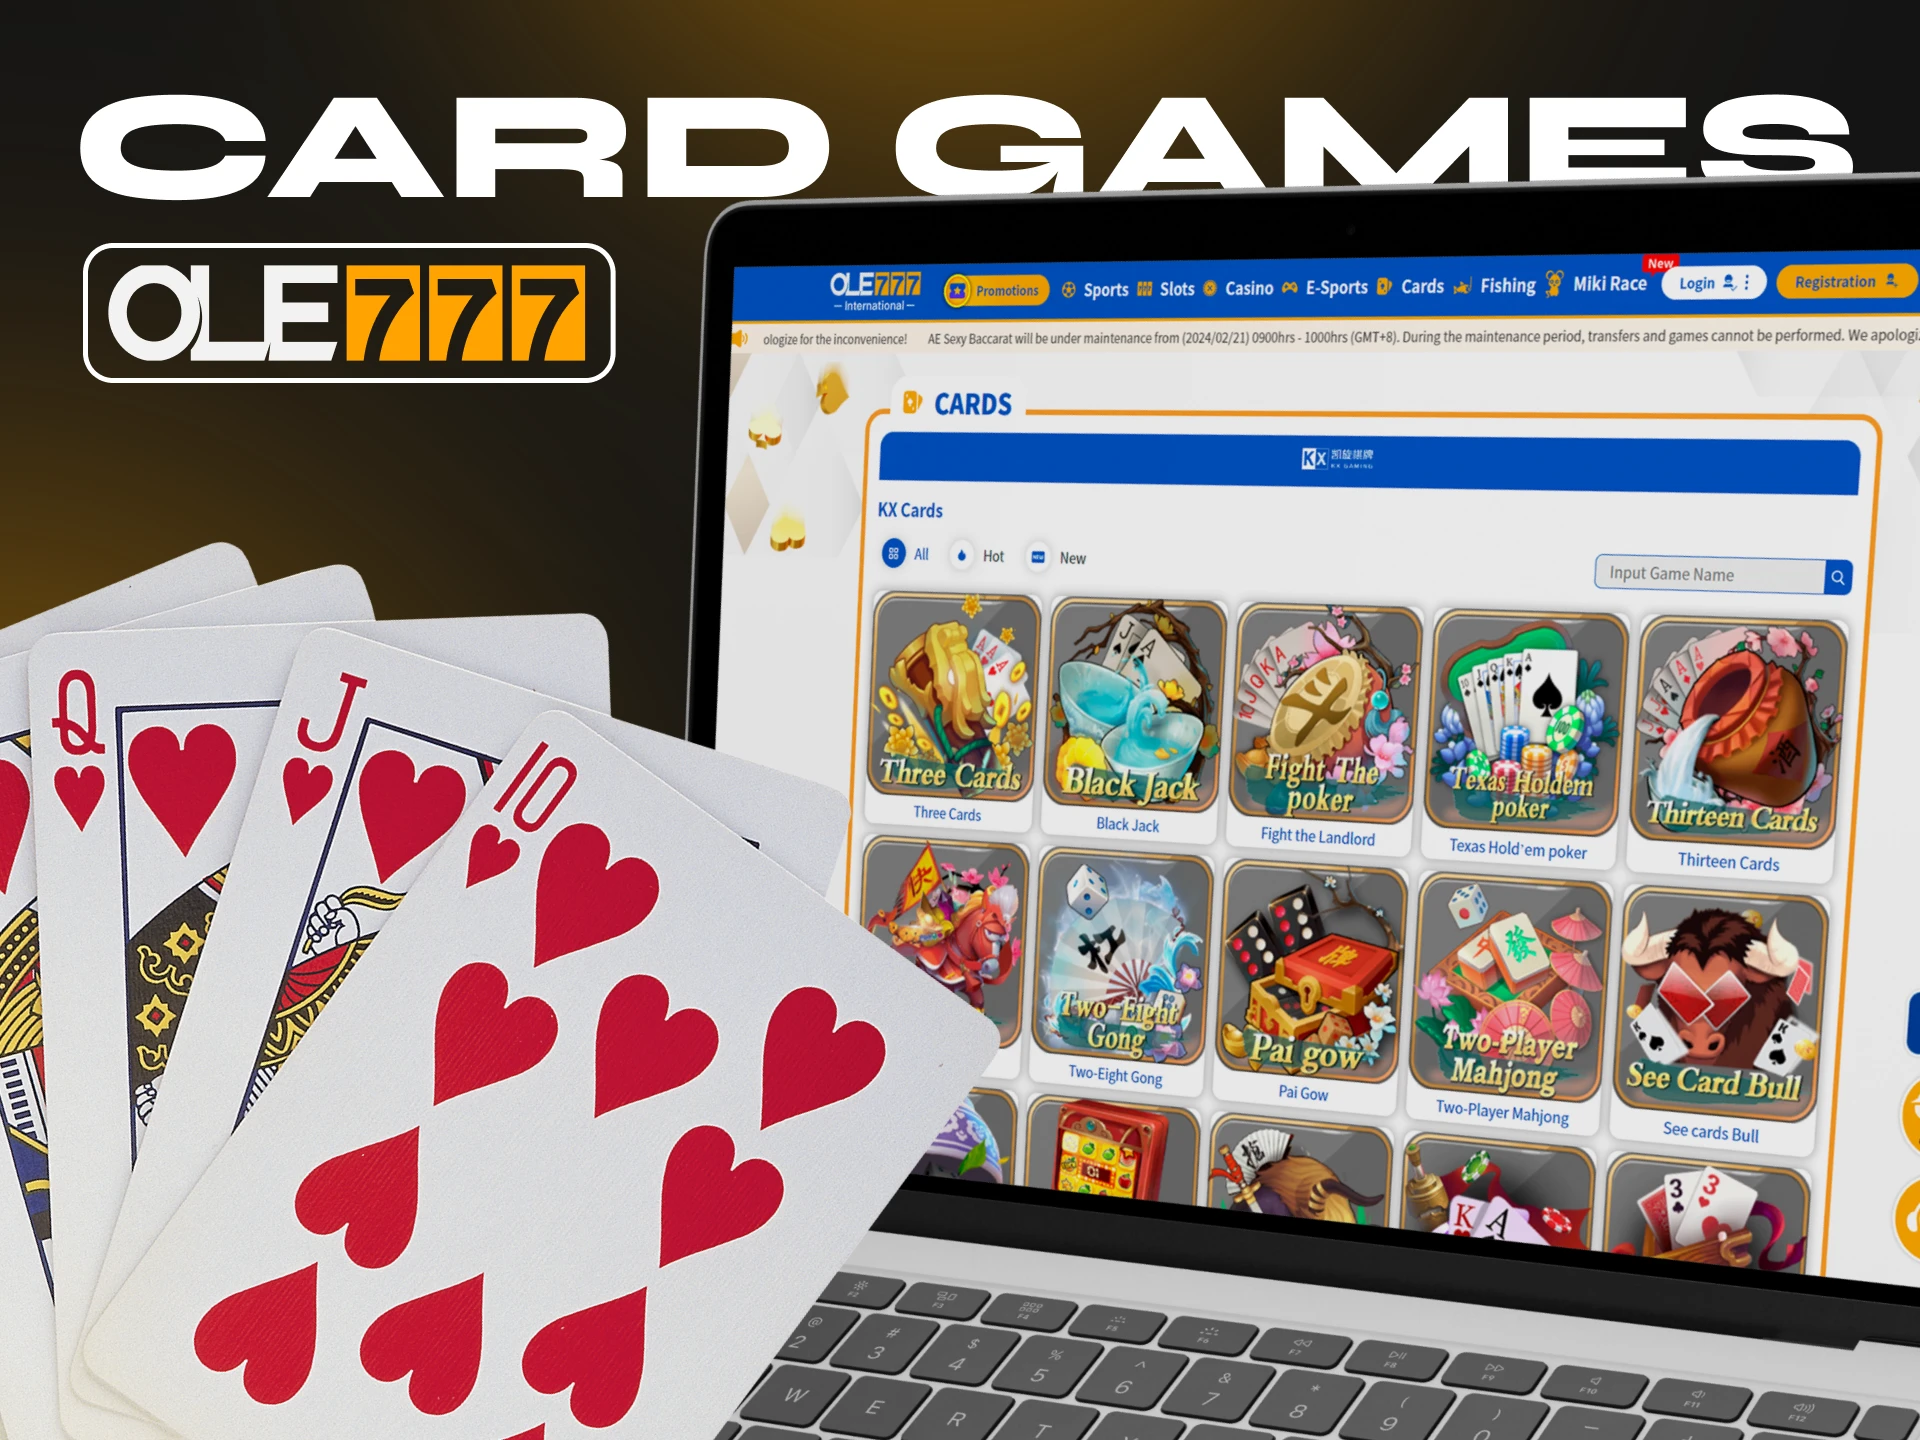 At Ole777 casino you can play your favourite card games.